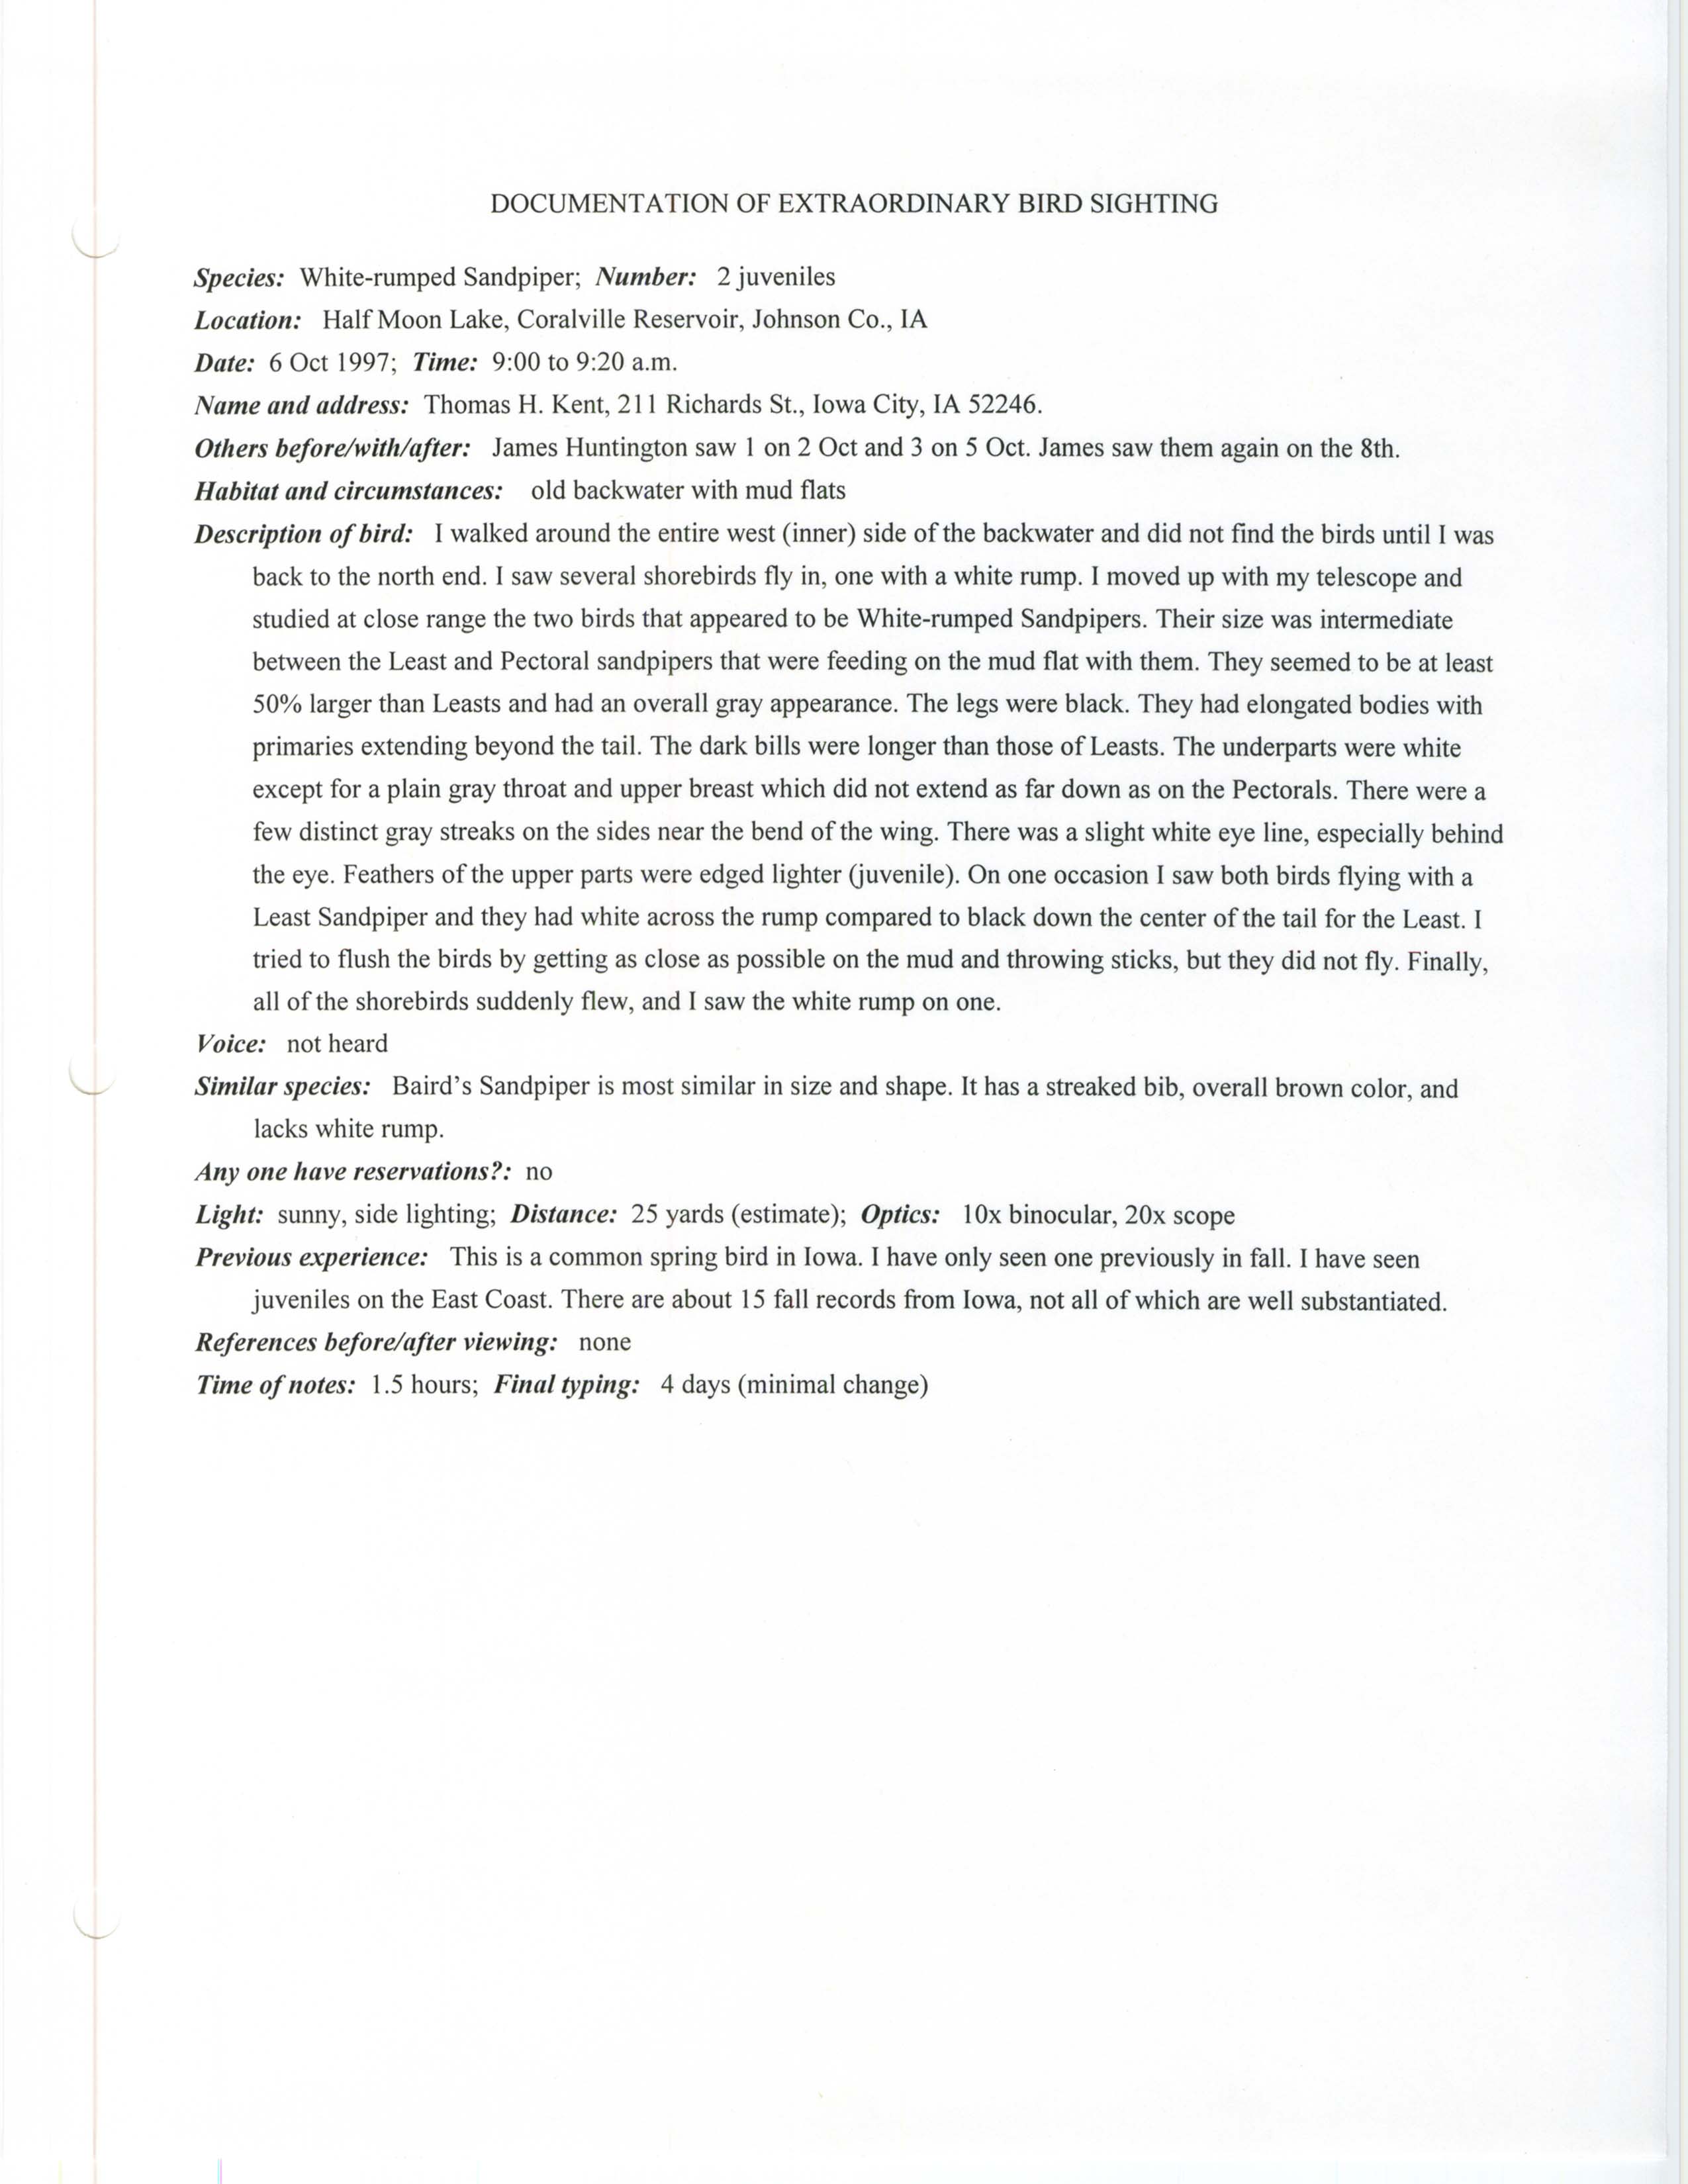 Rare bird documentation form for White-rumped Sandpiper at Half Moon Lake at Coralville Reservoir, 1997